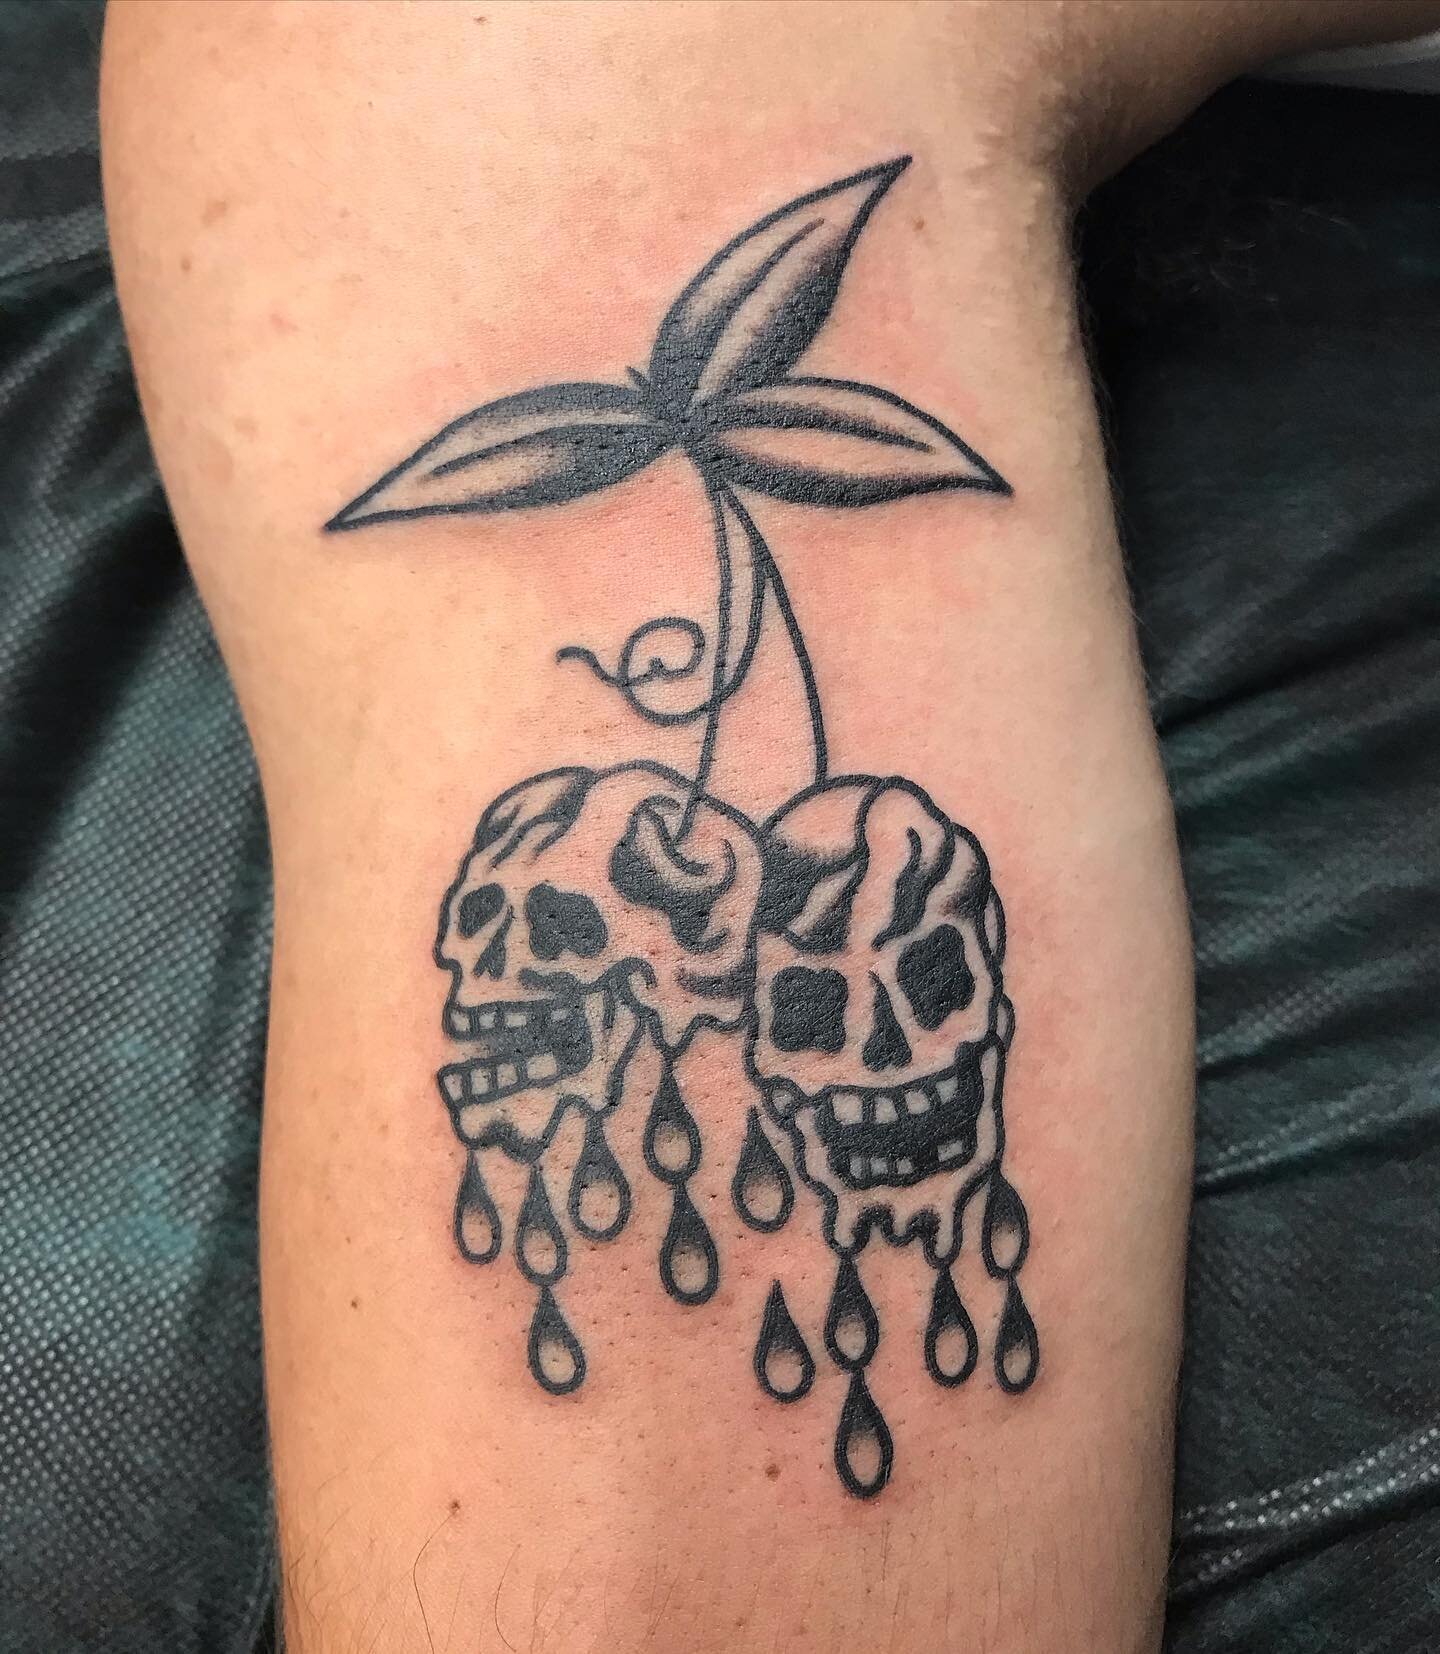 Holy shit, we made it through the hottest day ever recorded in Bay Area history. This tattoo was the only thing keeping me going! Haha THANK YOU @matty8ice! It&rsquo;s wonderful to tattoo you again🙌
.
.
#skullcherrytattoo #cherrytattoo #holyscythesj